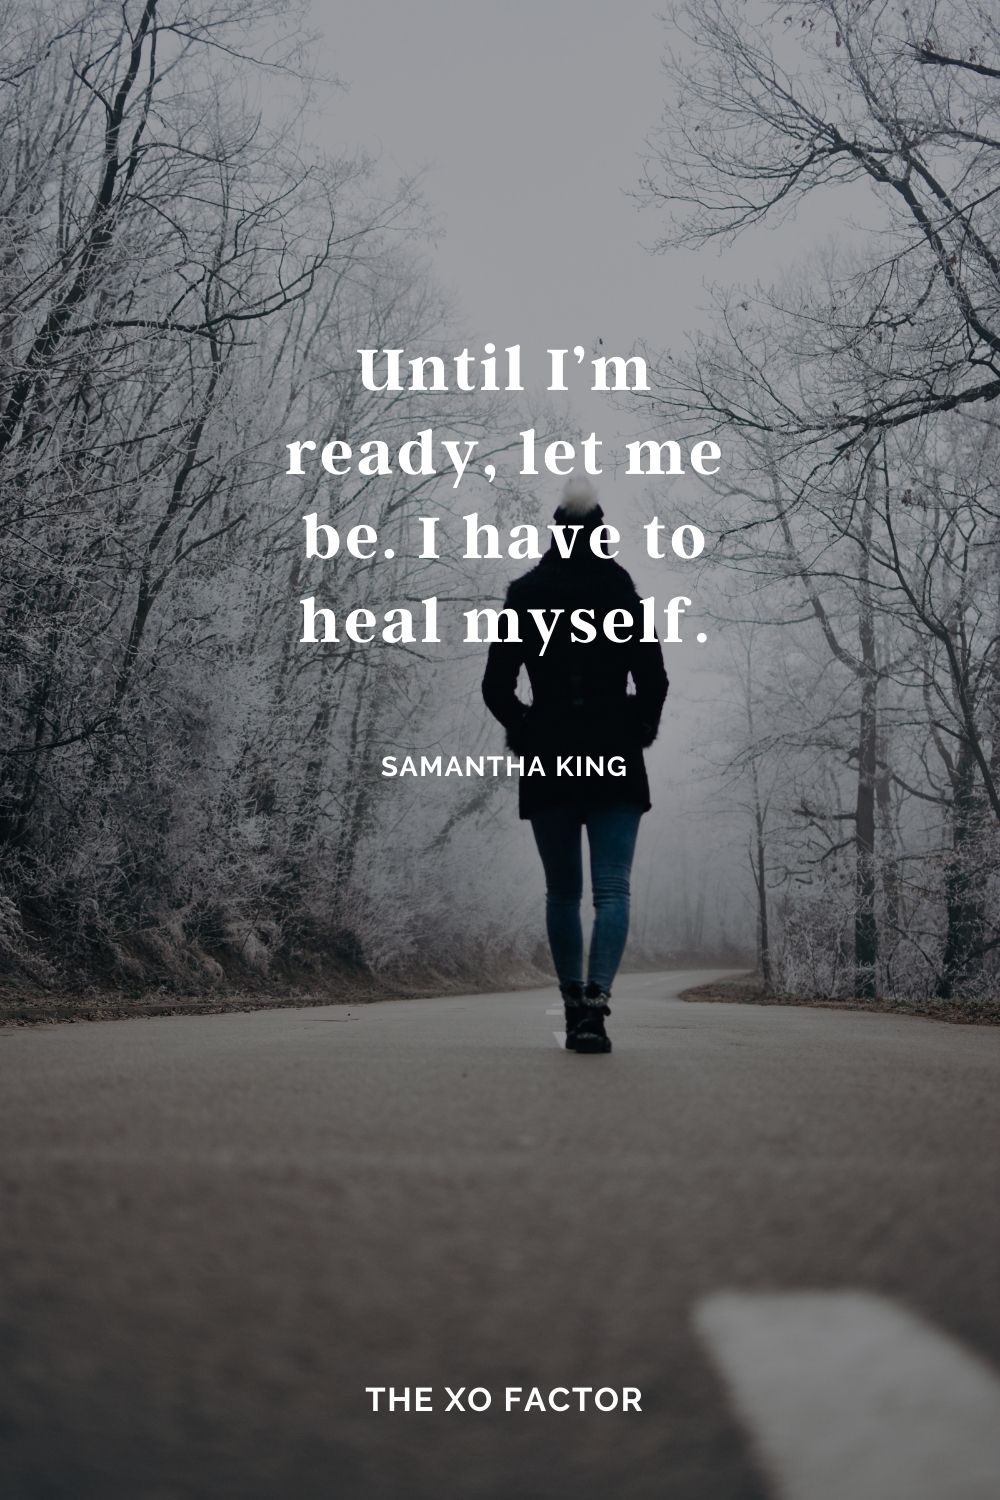 Until I’m ready, let me be. I have to heal myself. Samantha King